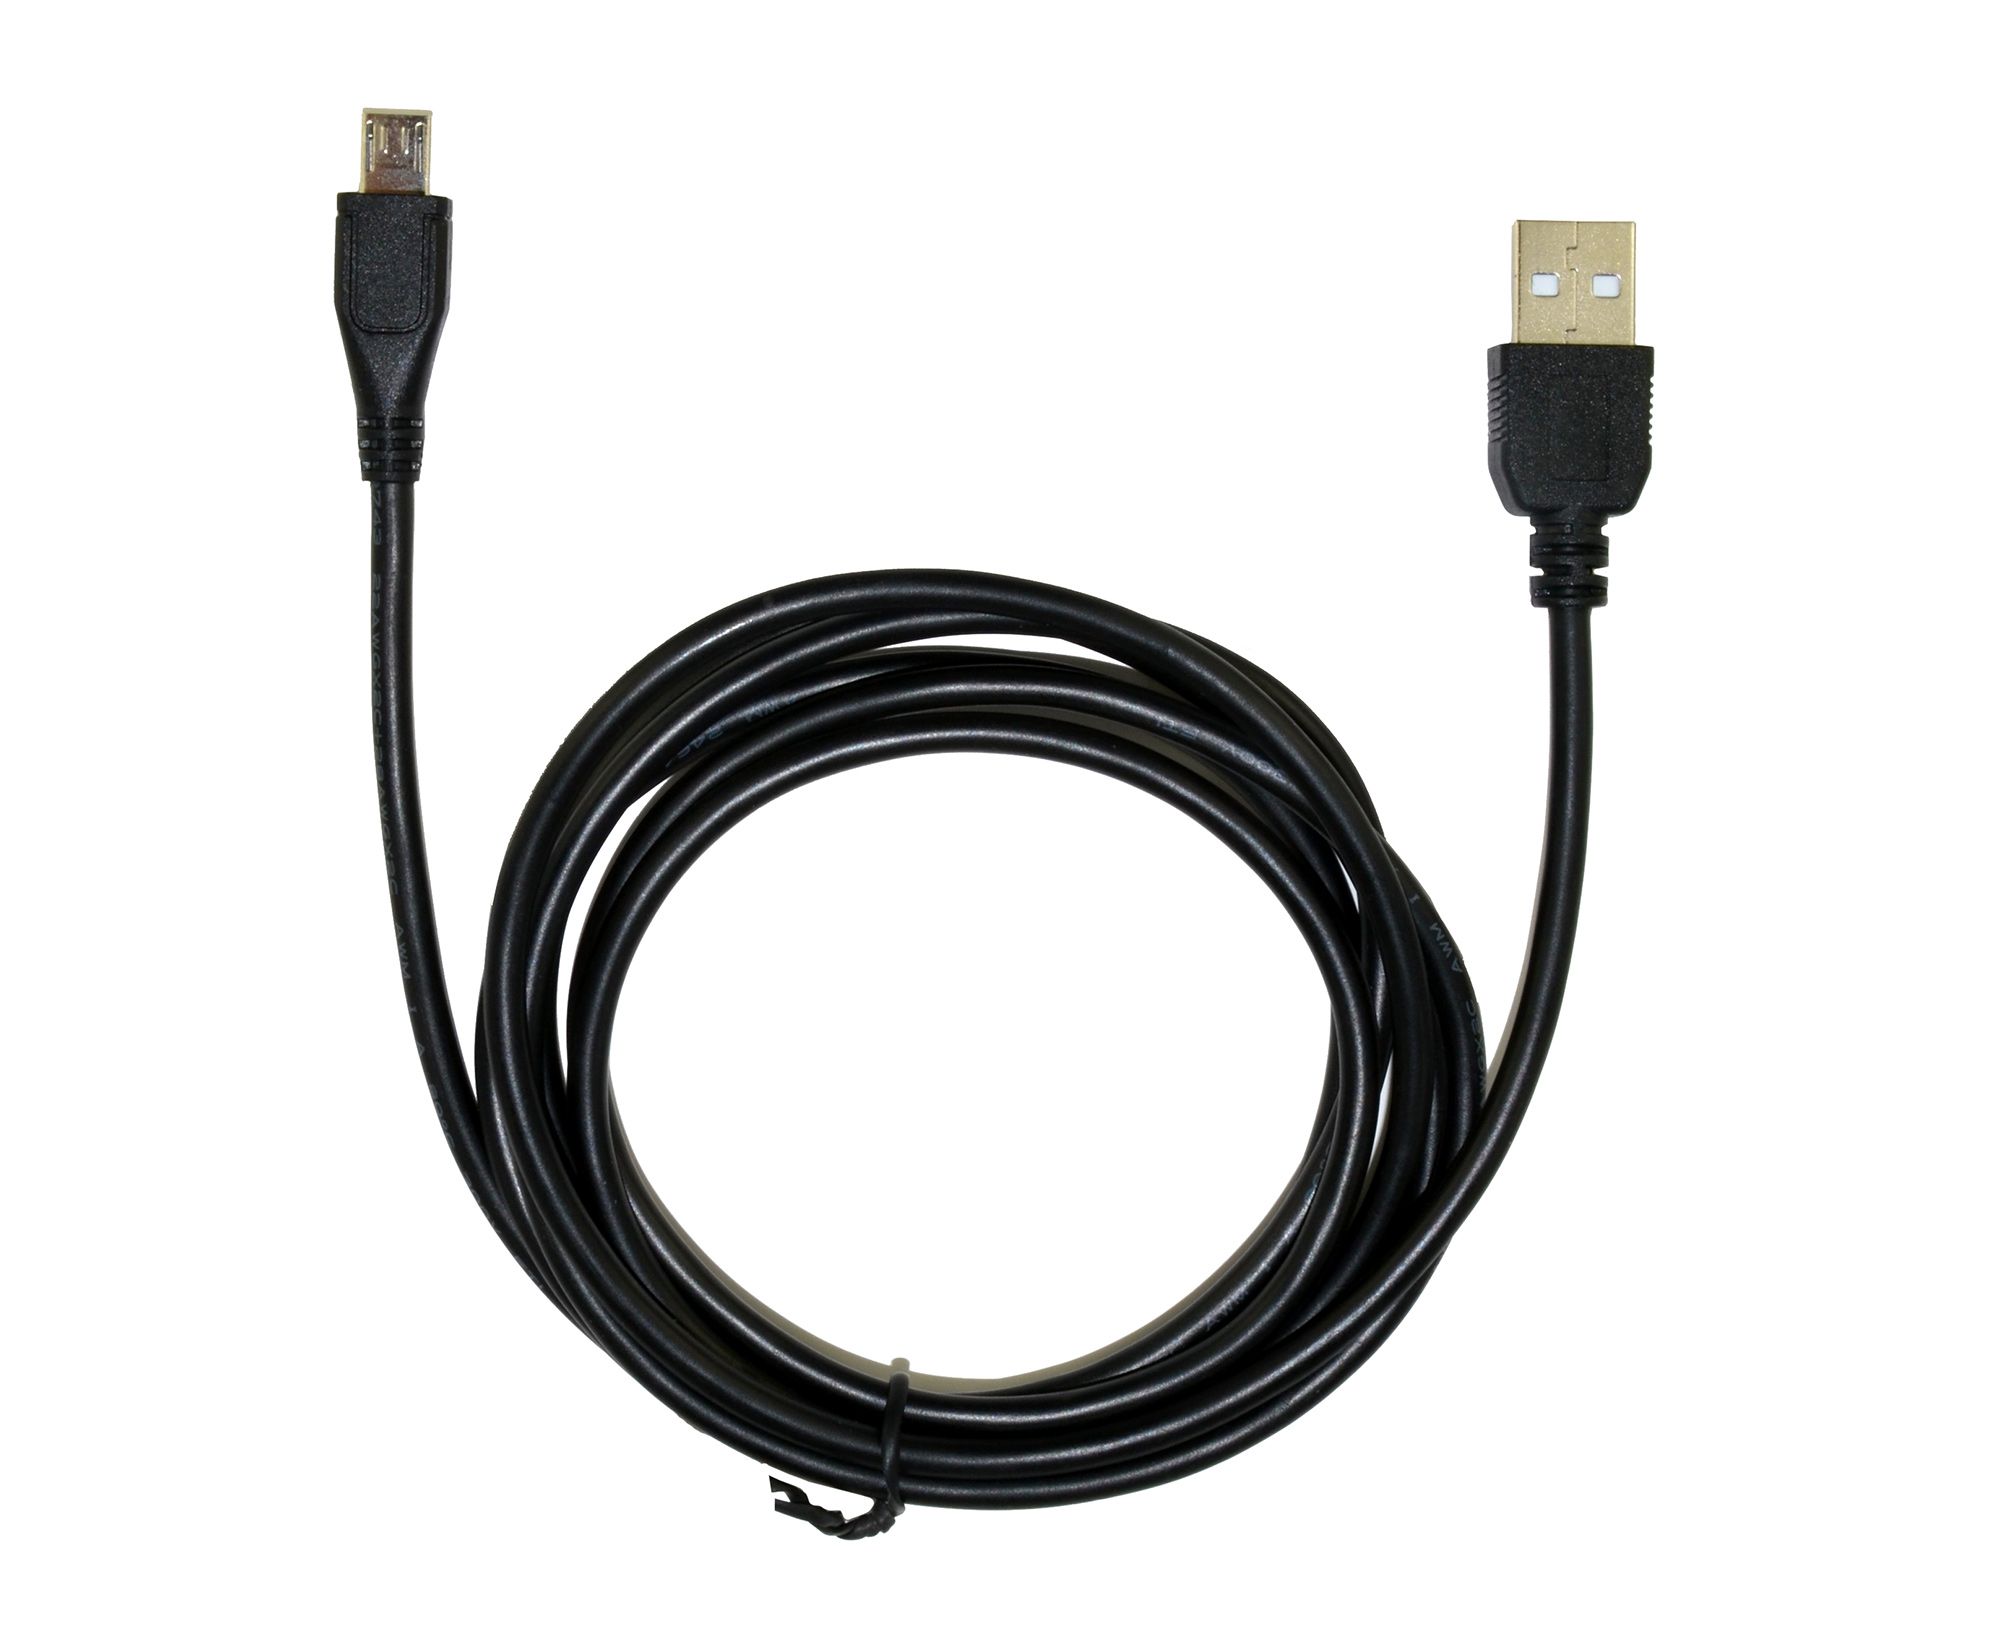 Proxicast: Special 8mm Long Tip MicroUSB Male - to - USB A Male Cable - 6ft